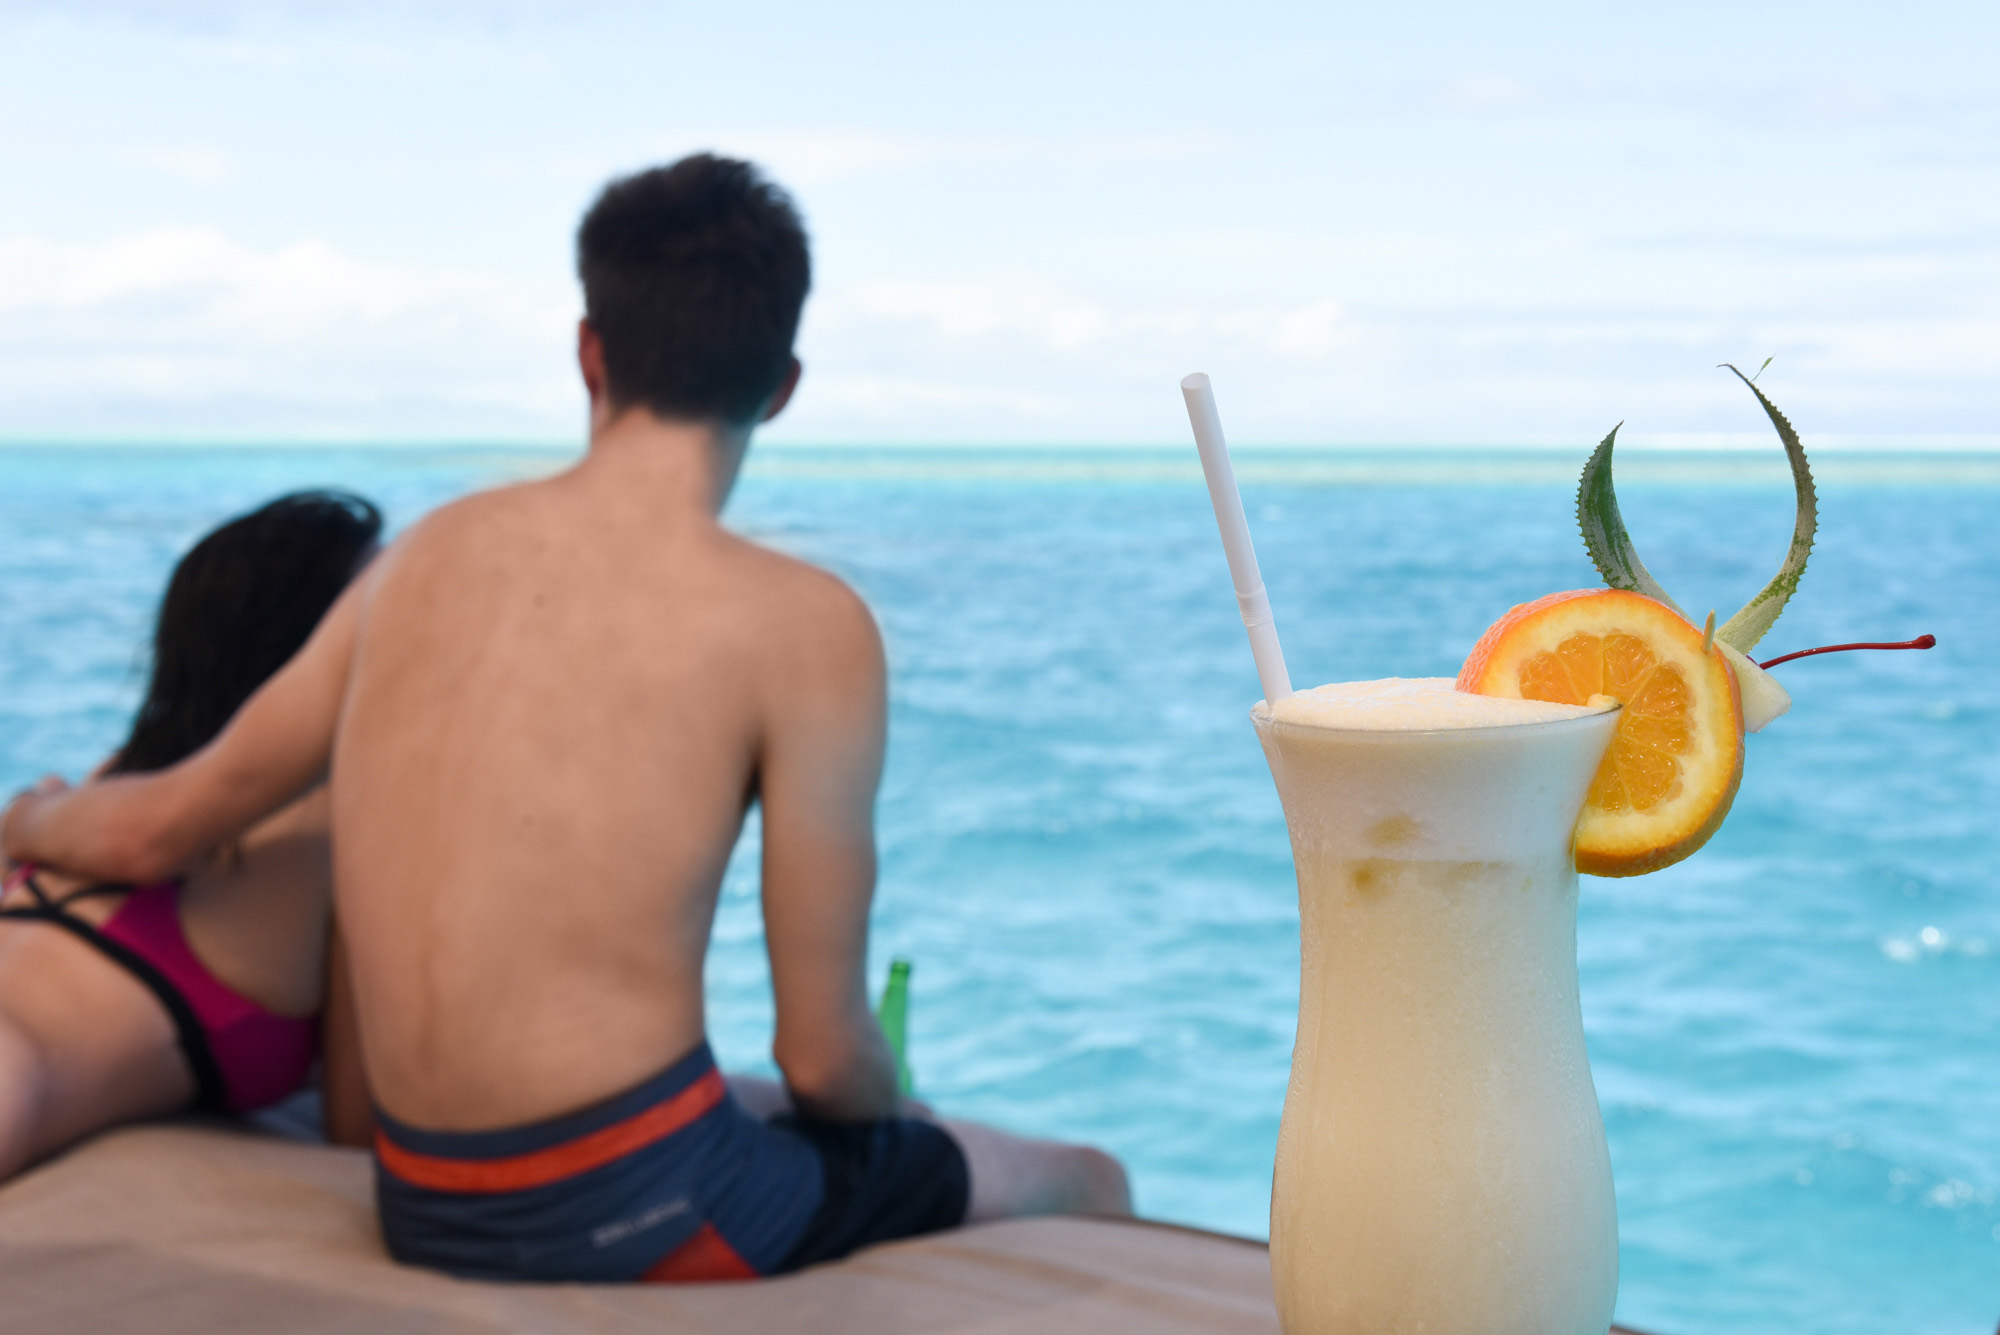 Composition with a glass of a cocktail in front of the turquoise sea and couple relaxing on the boat